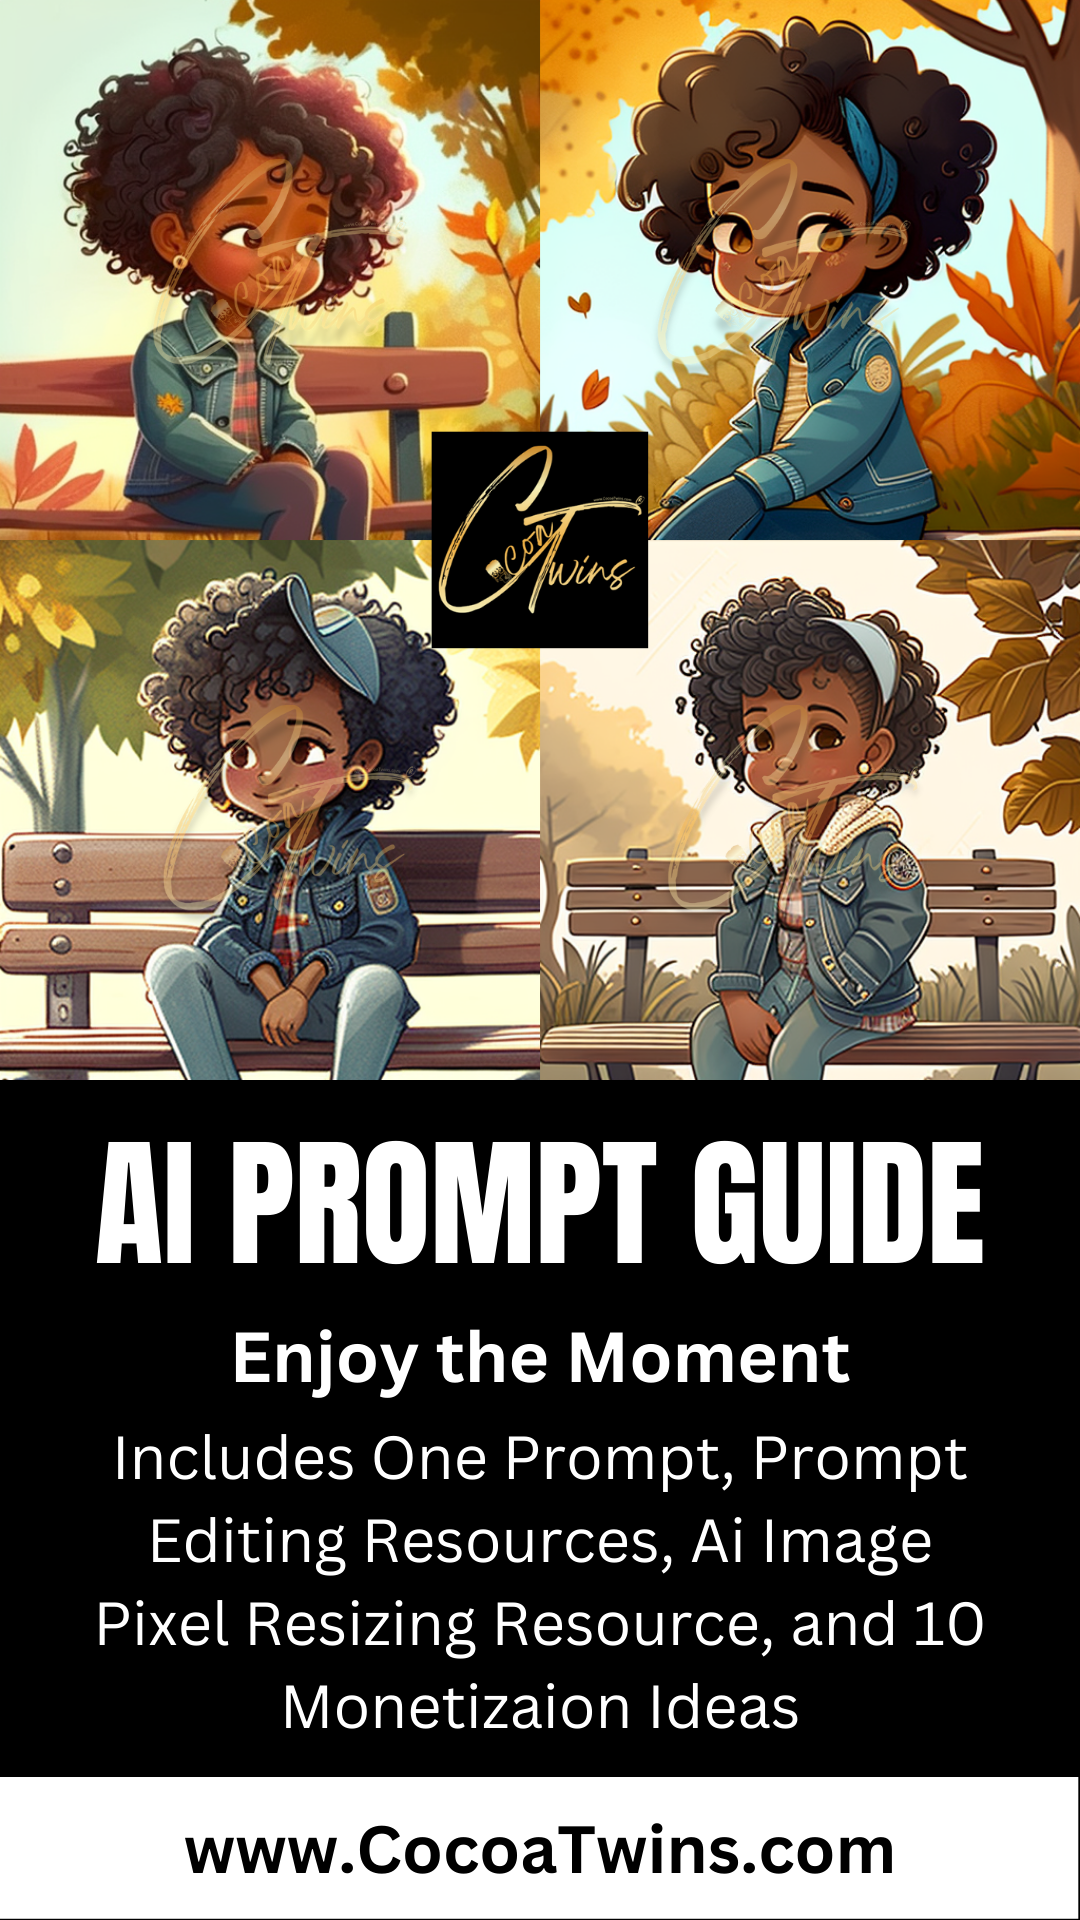 Single Prompt MidJourney Guide - Enjoy the Moment